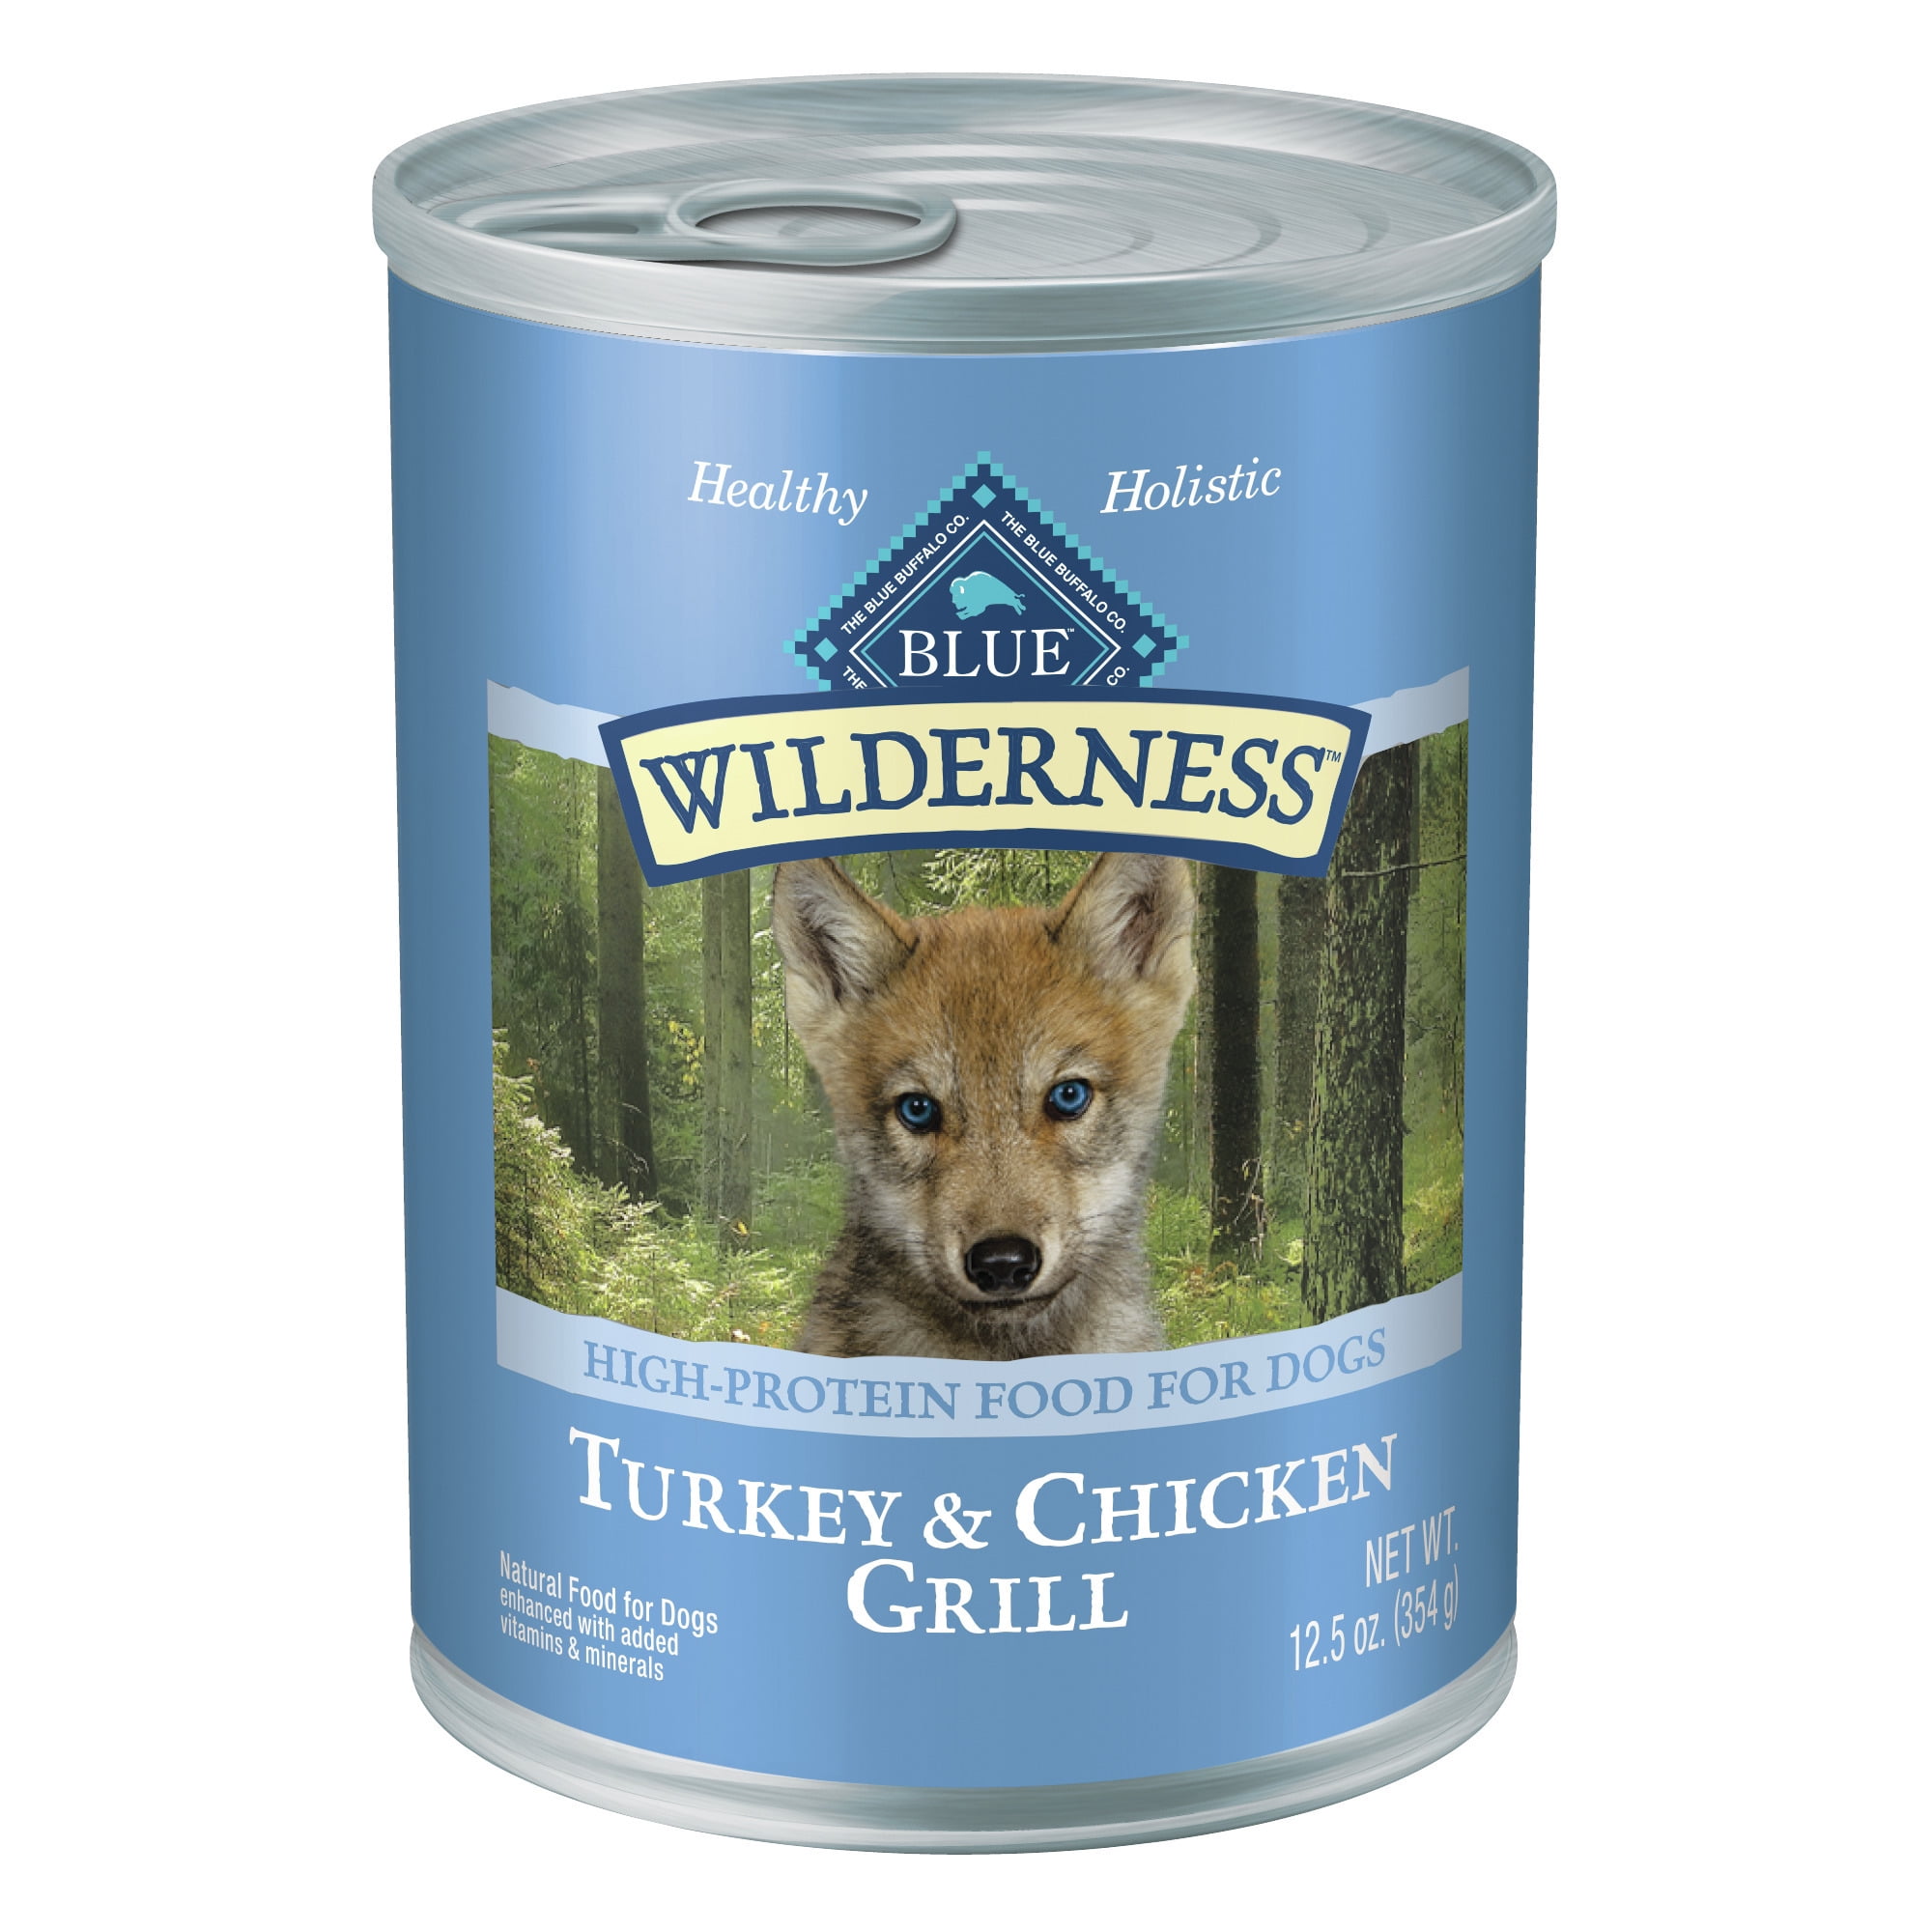 Blue Buffalo Wilderness High Protein Turkey and Chicken Wet Dog Food for Puppies, Grain-Free, 12.5 oz. Can